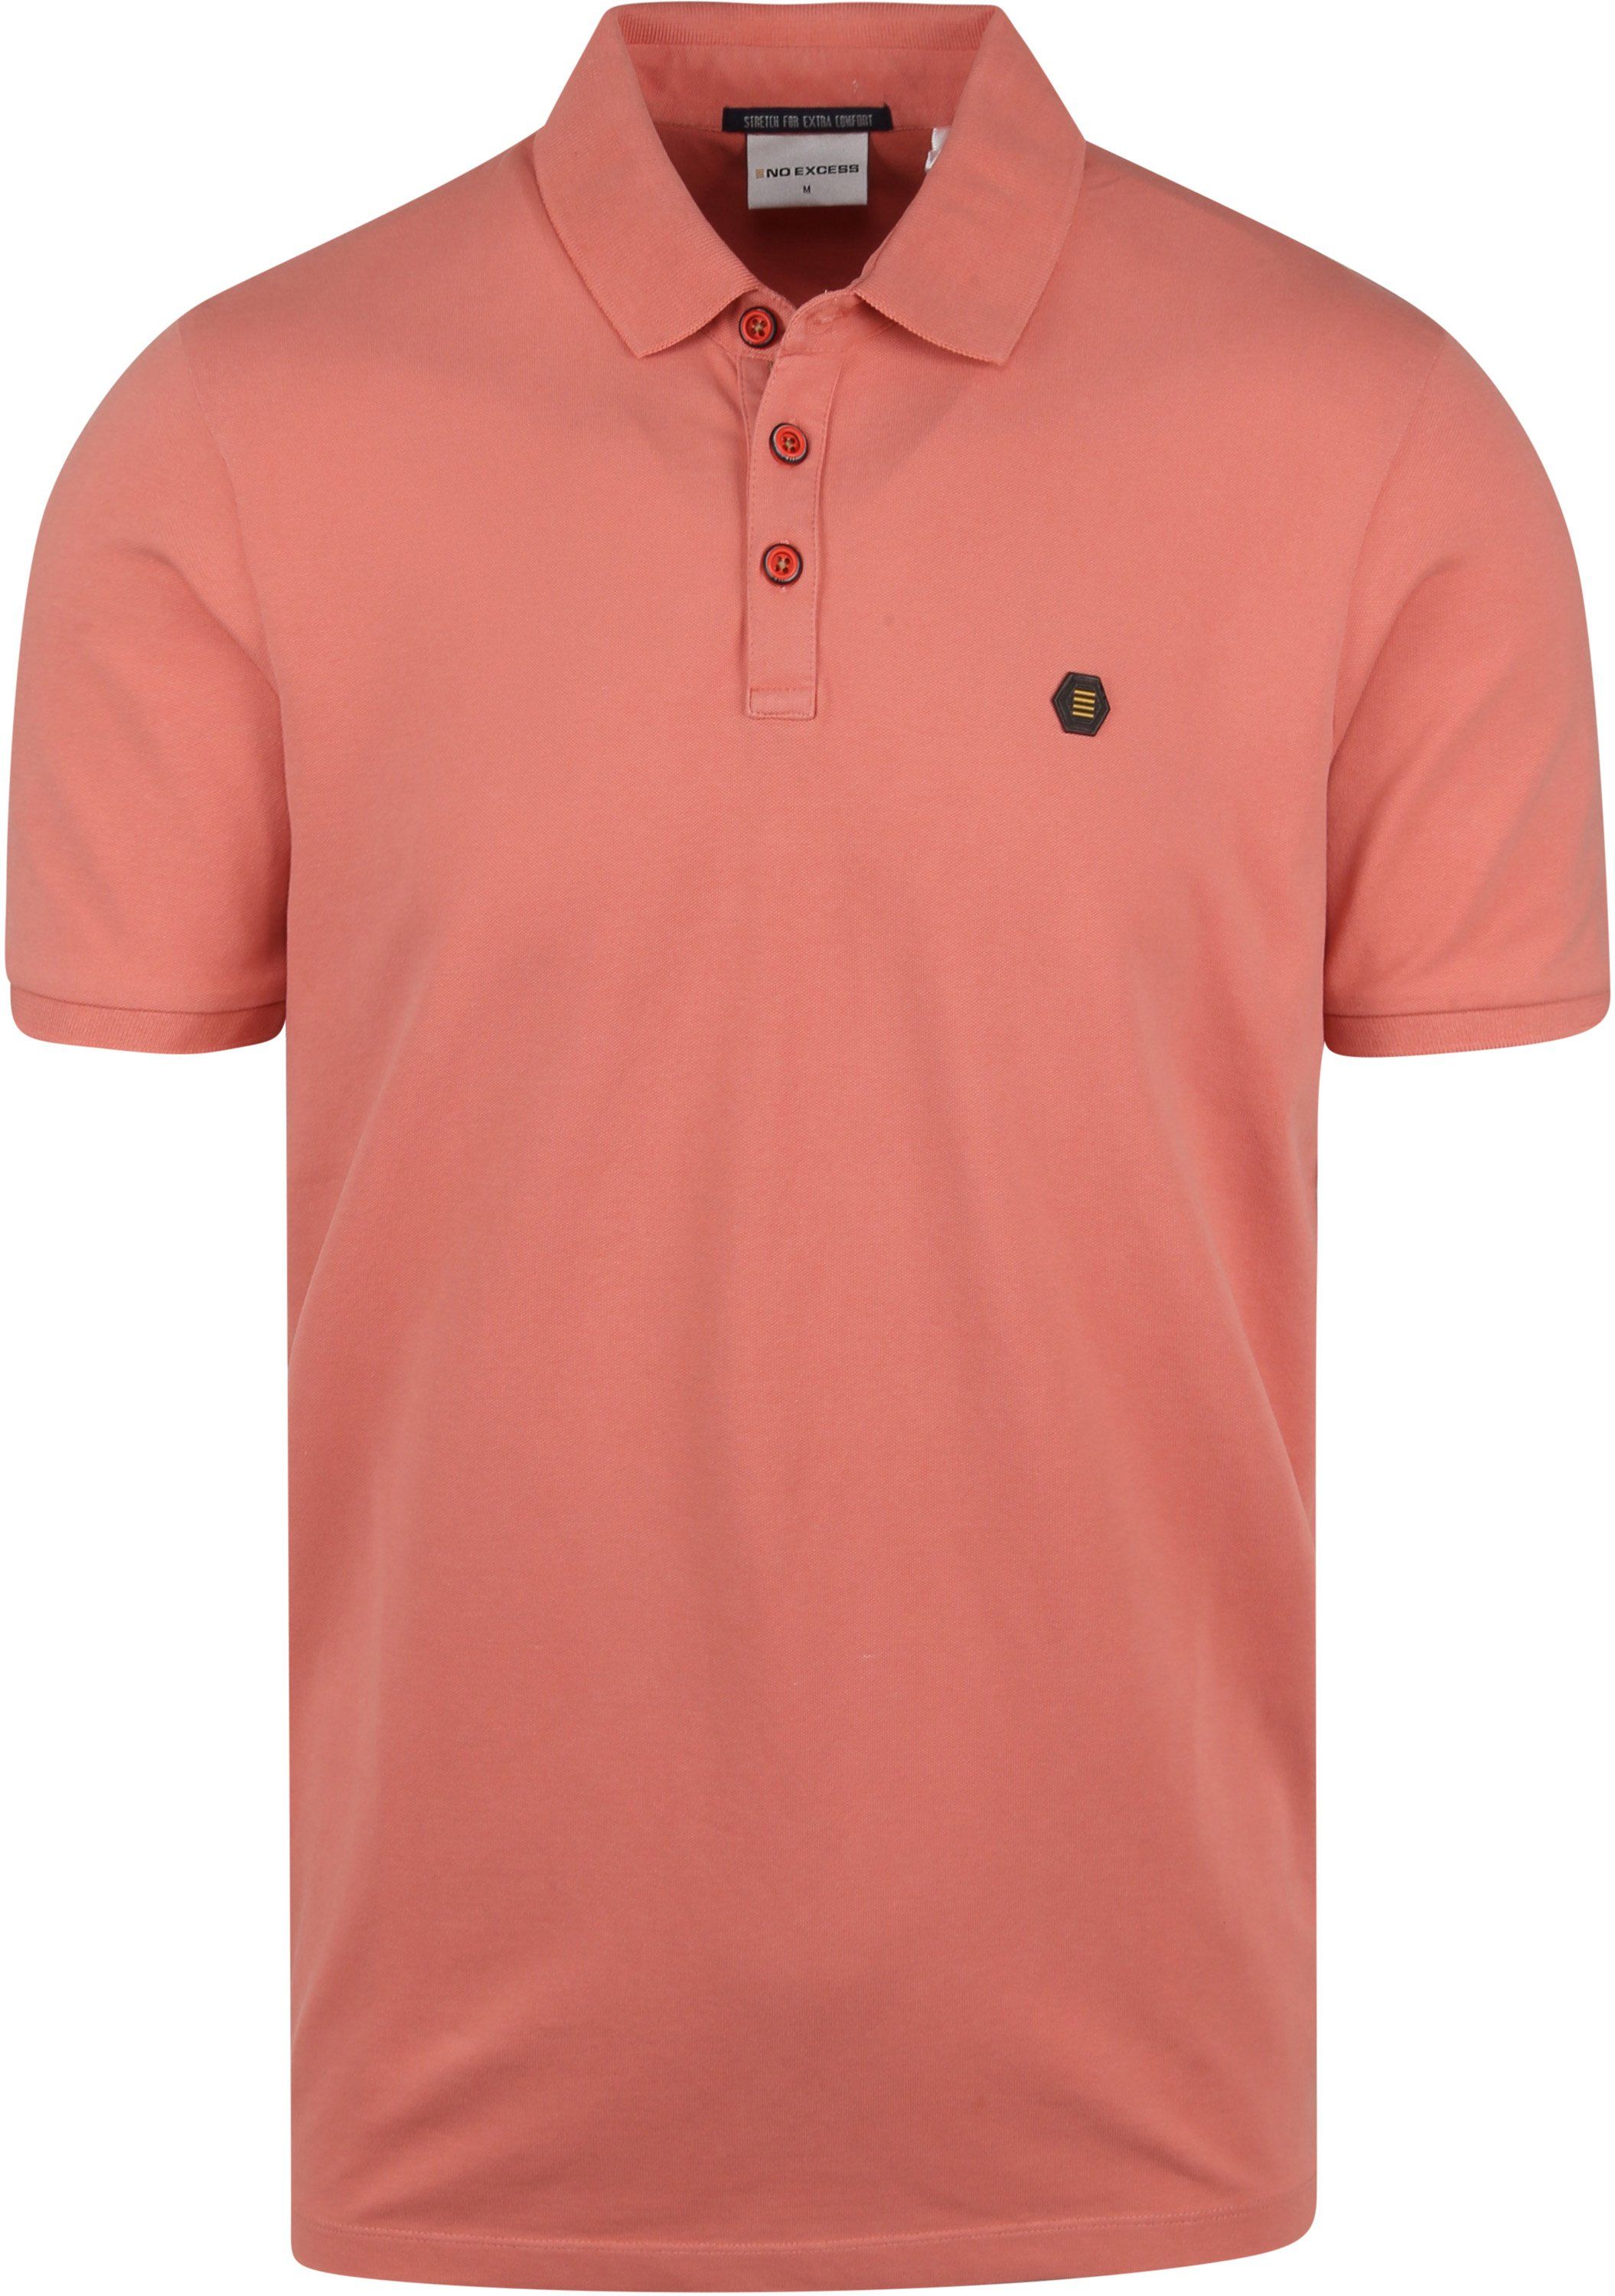 No-Excess Polo Shirt Coral Red Pink size 3XL